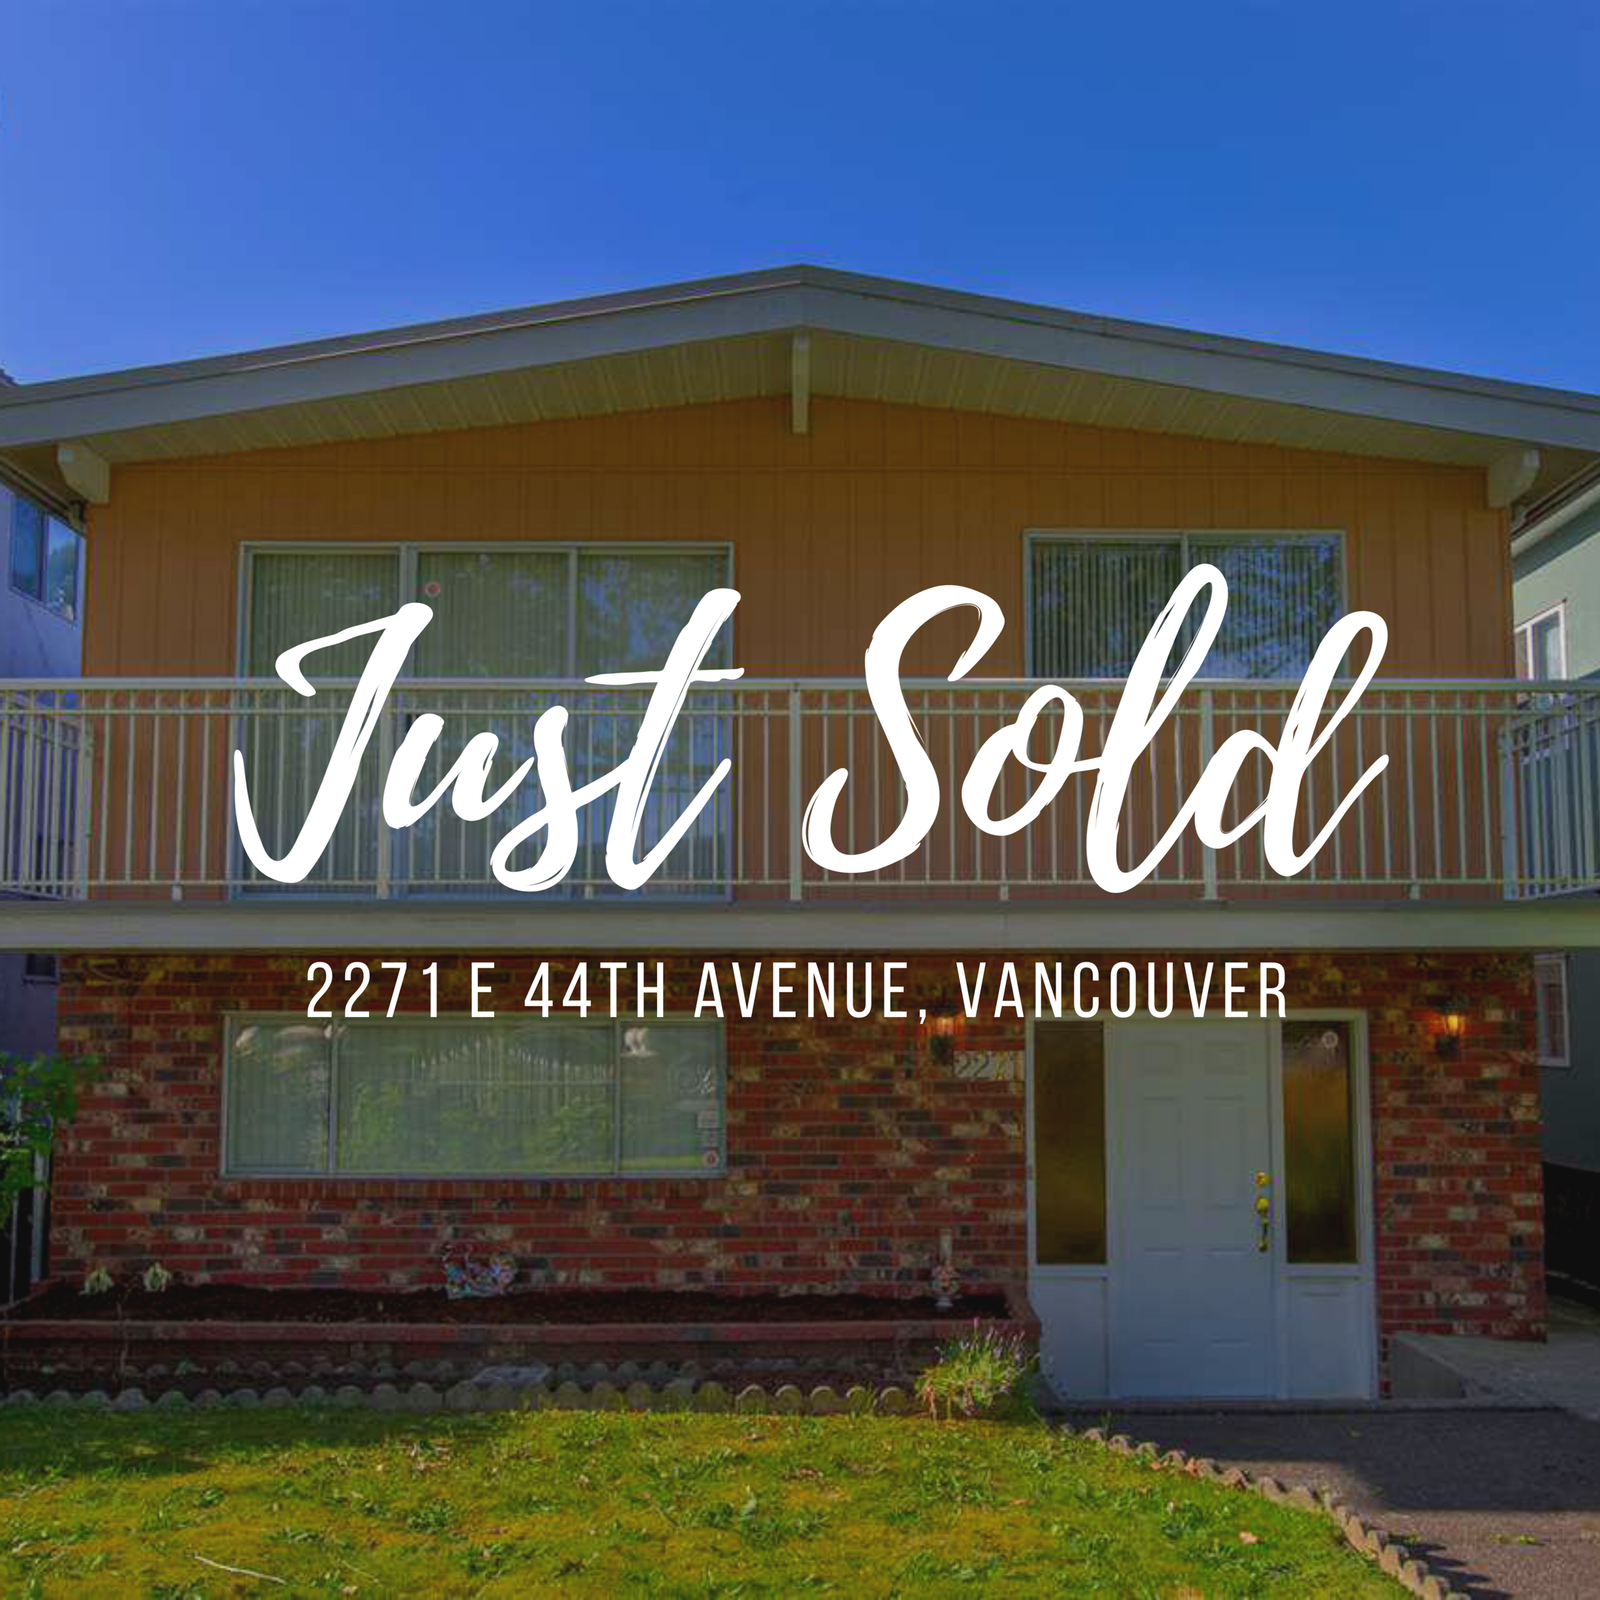 Another Sold For Team Léo!